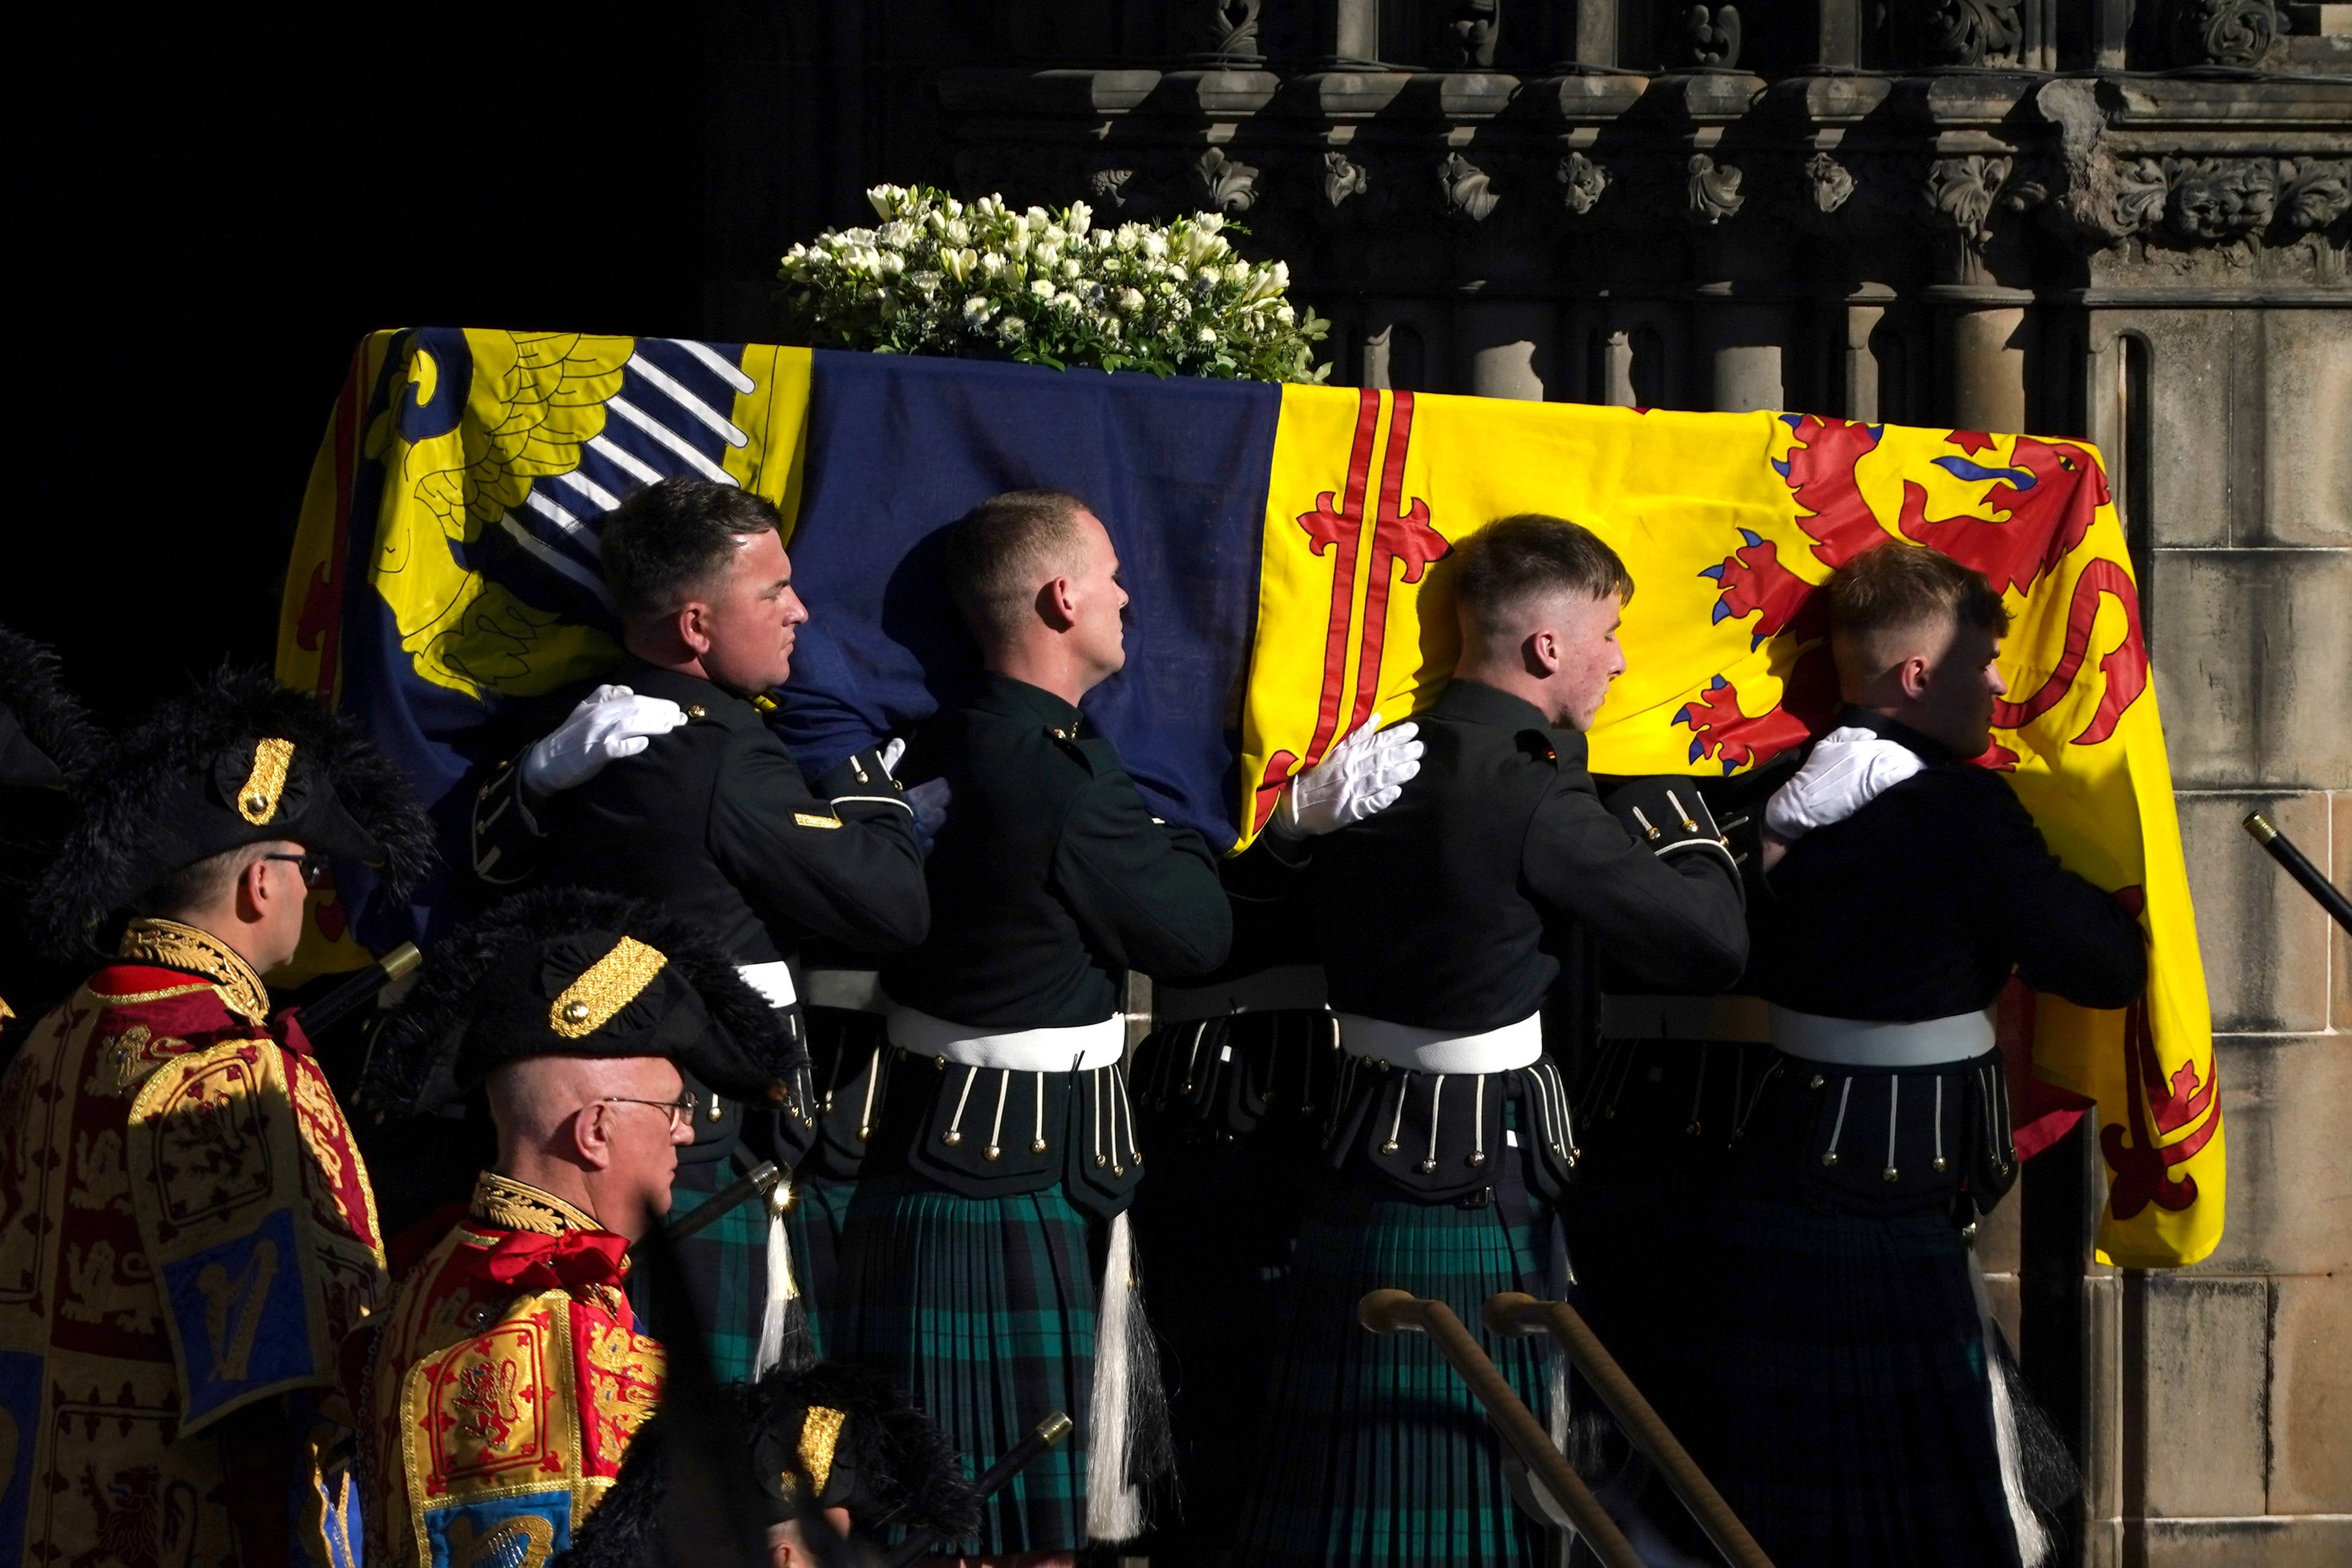 The arrests came during events while the Queen’s coffin was in Edinburgh (PA)